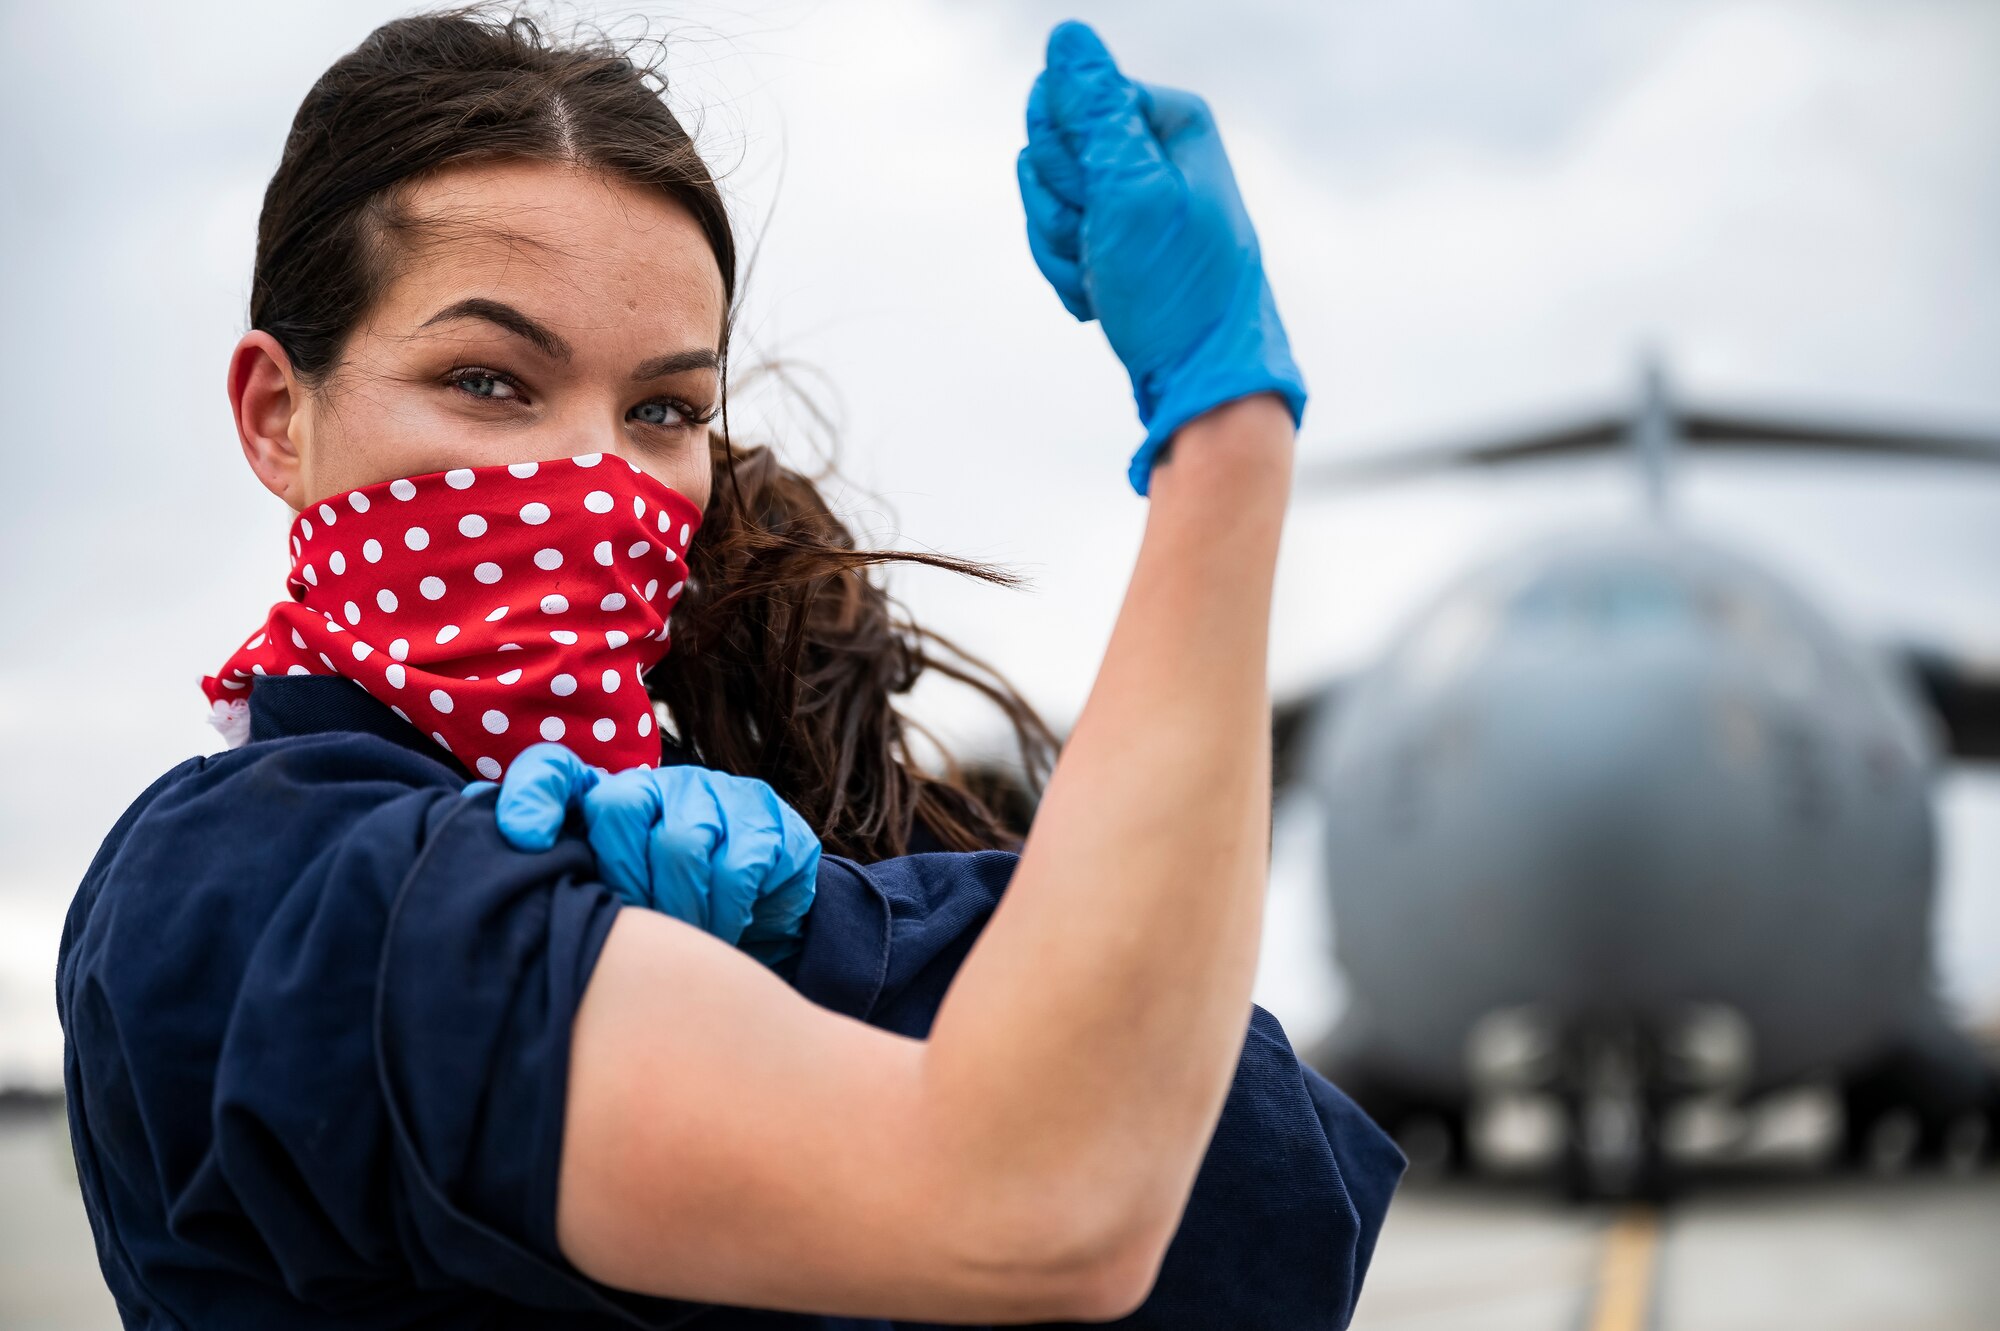 Airman 1st Class Bethany Dacus, 911th Aircraft Maintenance Squadron crew chief, poses for a photo